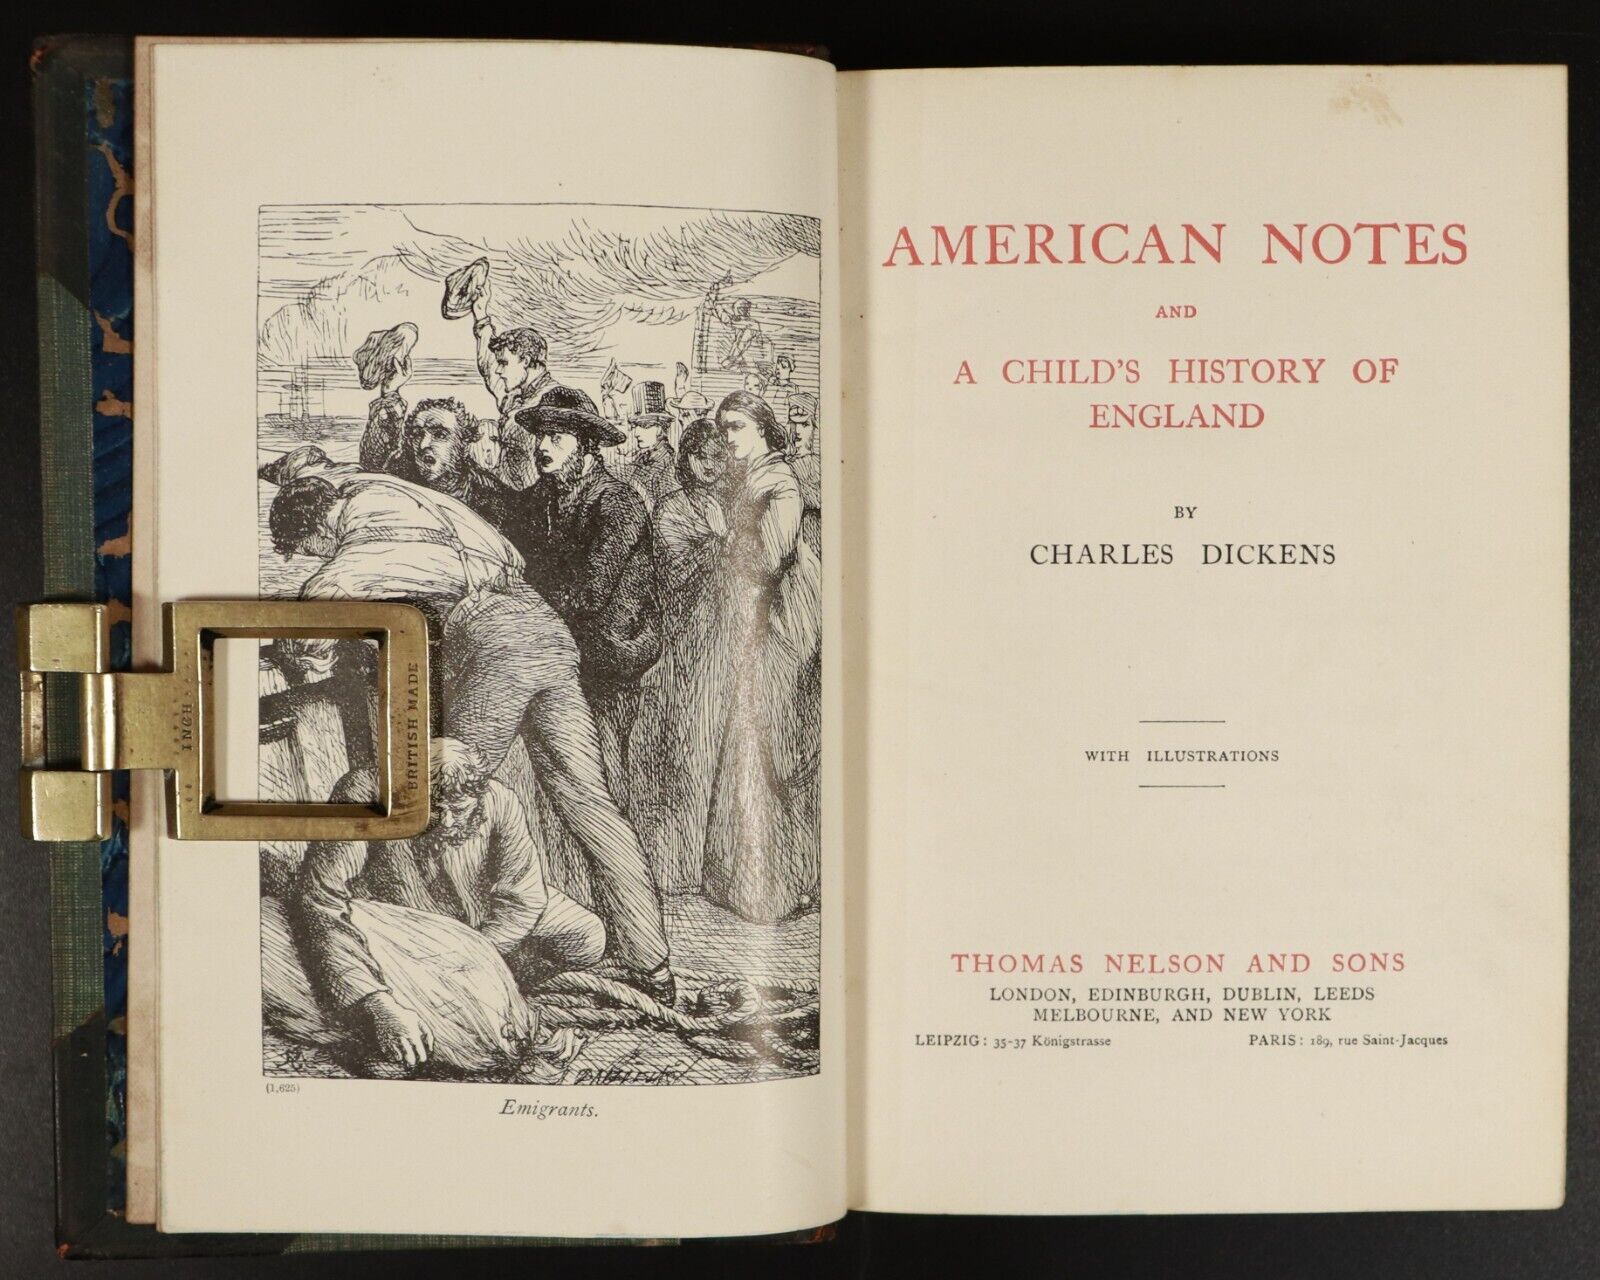 c1912 American Notes & History Of England by Charles Dickens Antique Book